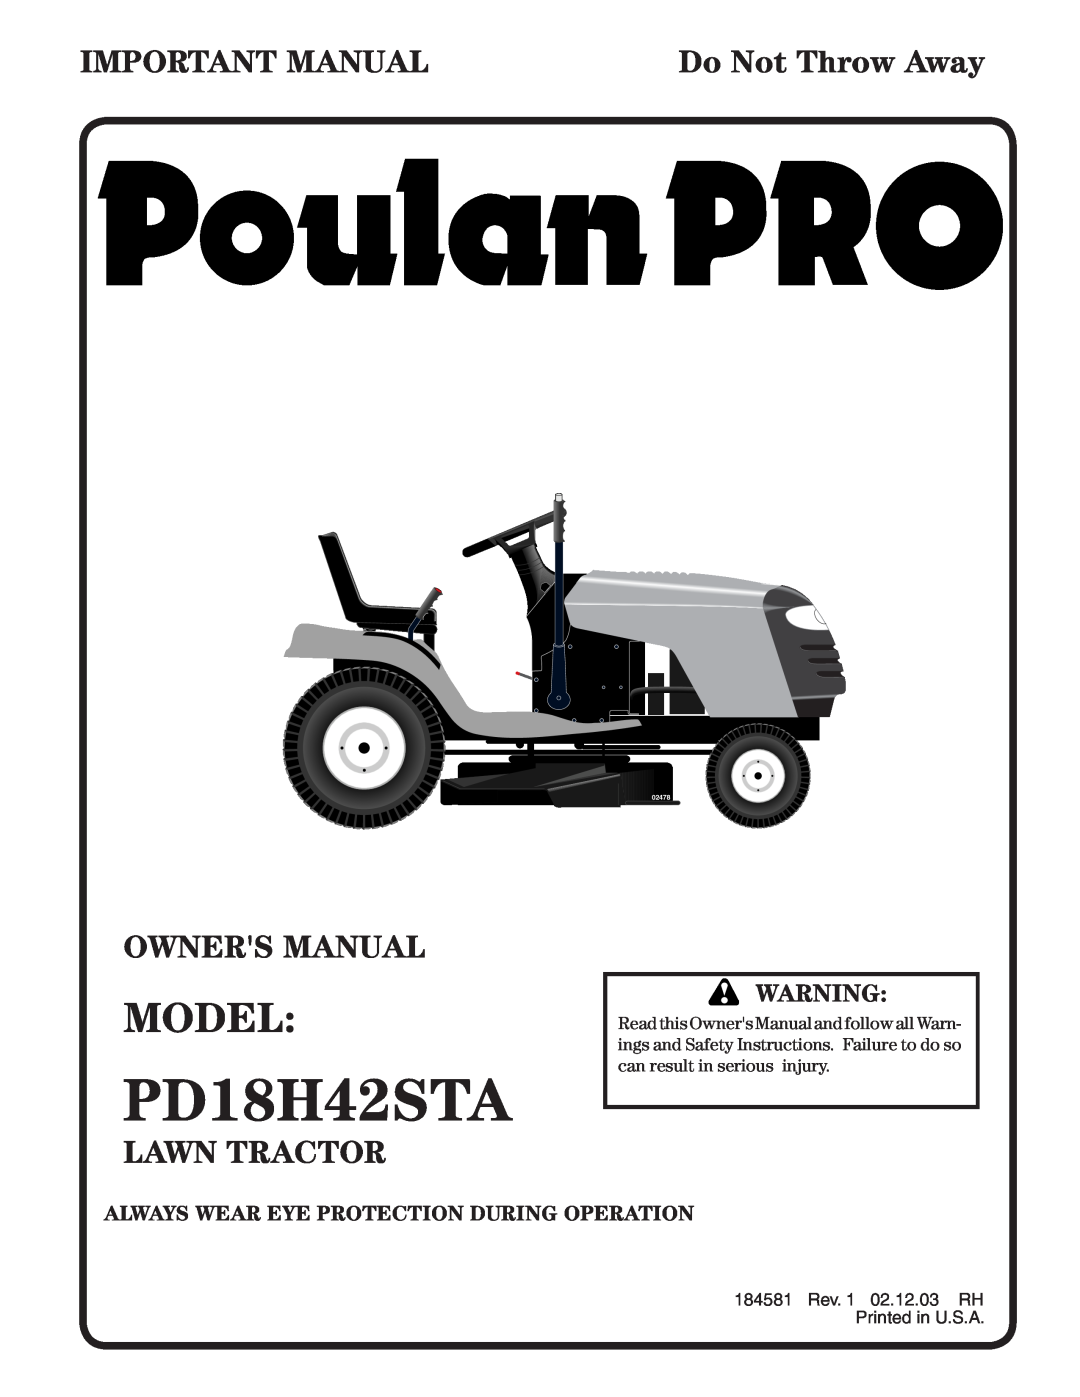 Poulan 184581 owner manual Model, PD18H42STA, Important Manual, Lawn Tractor, Do Not Throw Away, 02478 